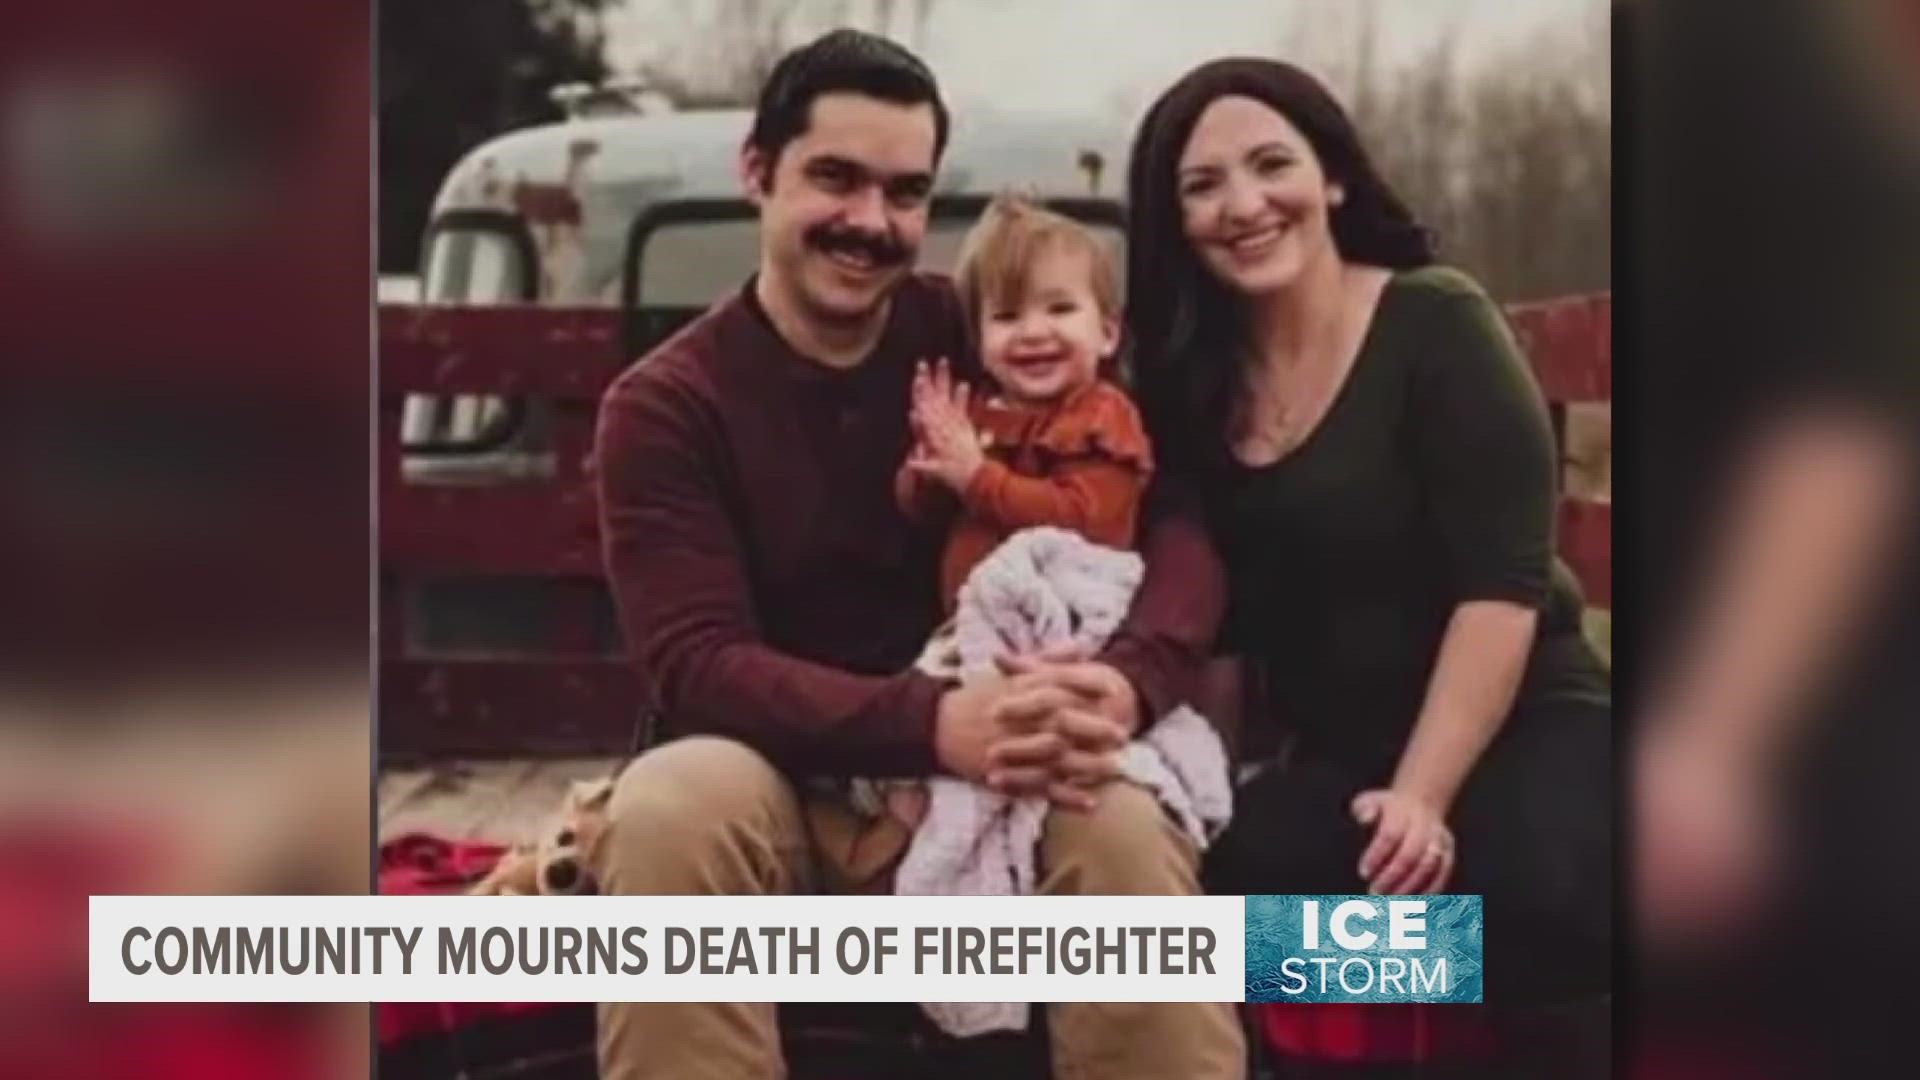 The Paw Paw Fire Dept. is mourning the loss of one of their own. Authorities said the firefighter came into contact with a downed power line Wednesday.